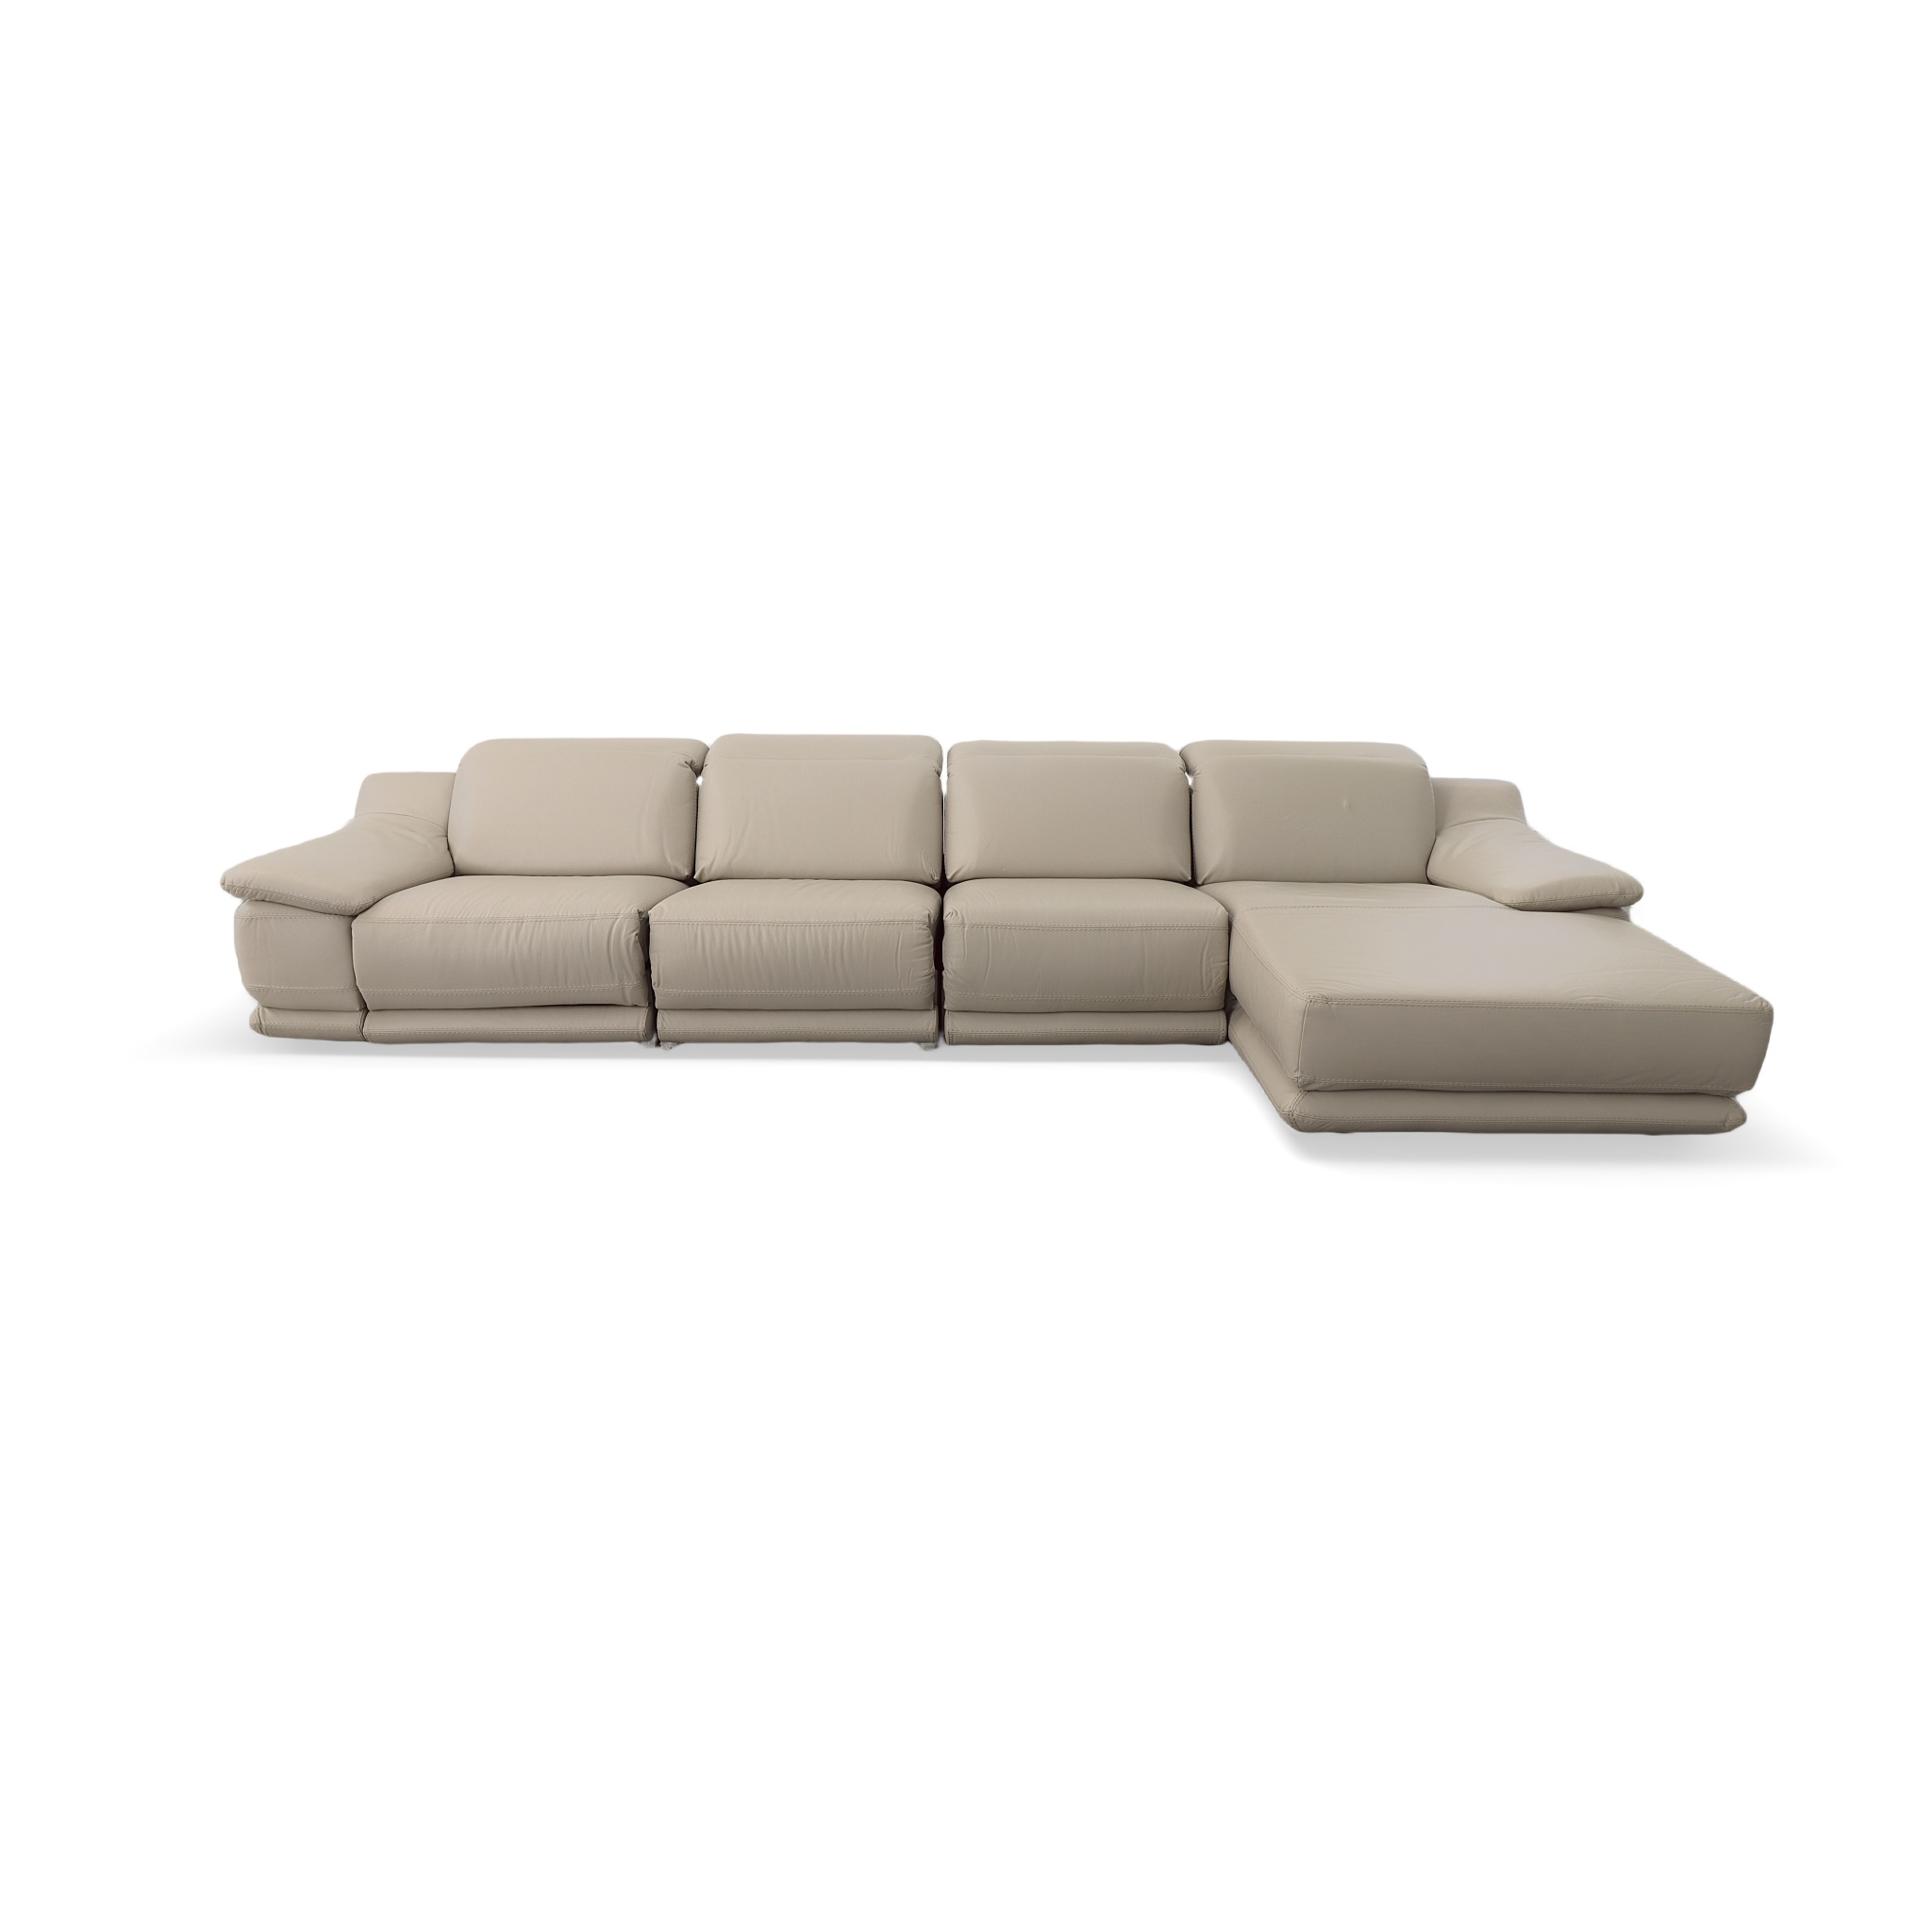 Modena Leather Motion Sectional 4 Pieces